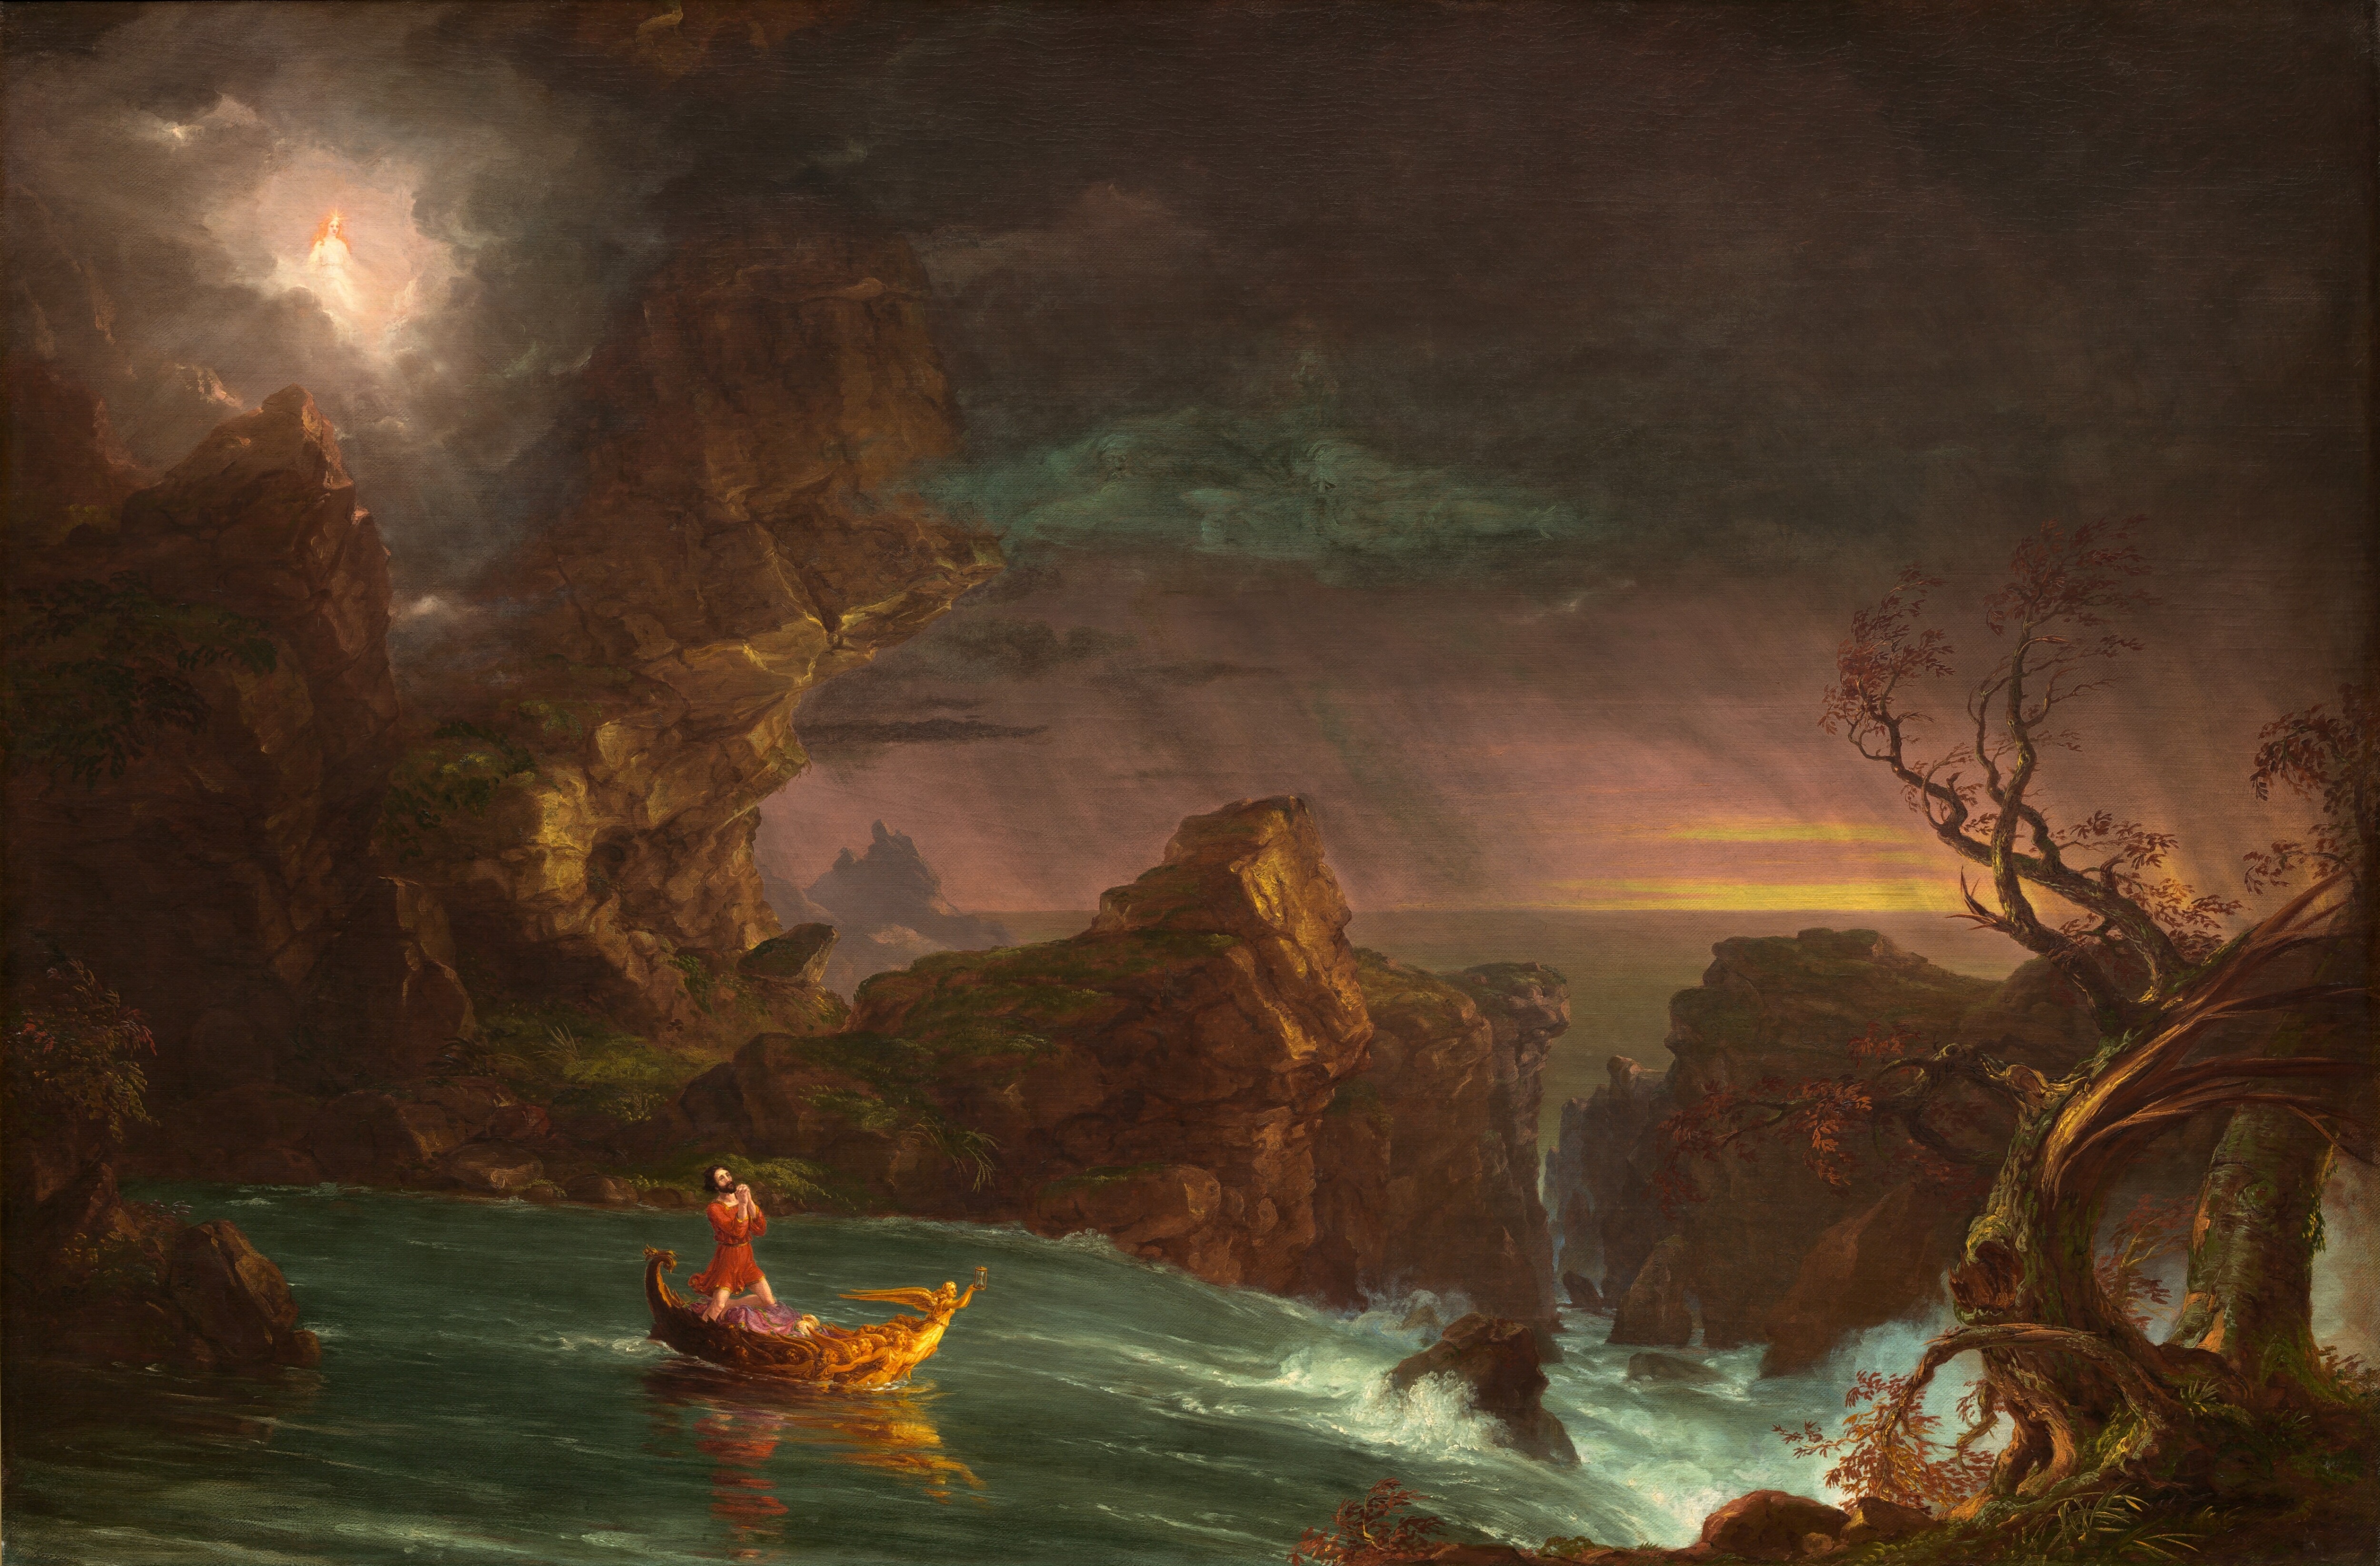 Thomas Cole - The Voyage of Life Manhood, 1842 (National Gallery of Art)